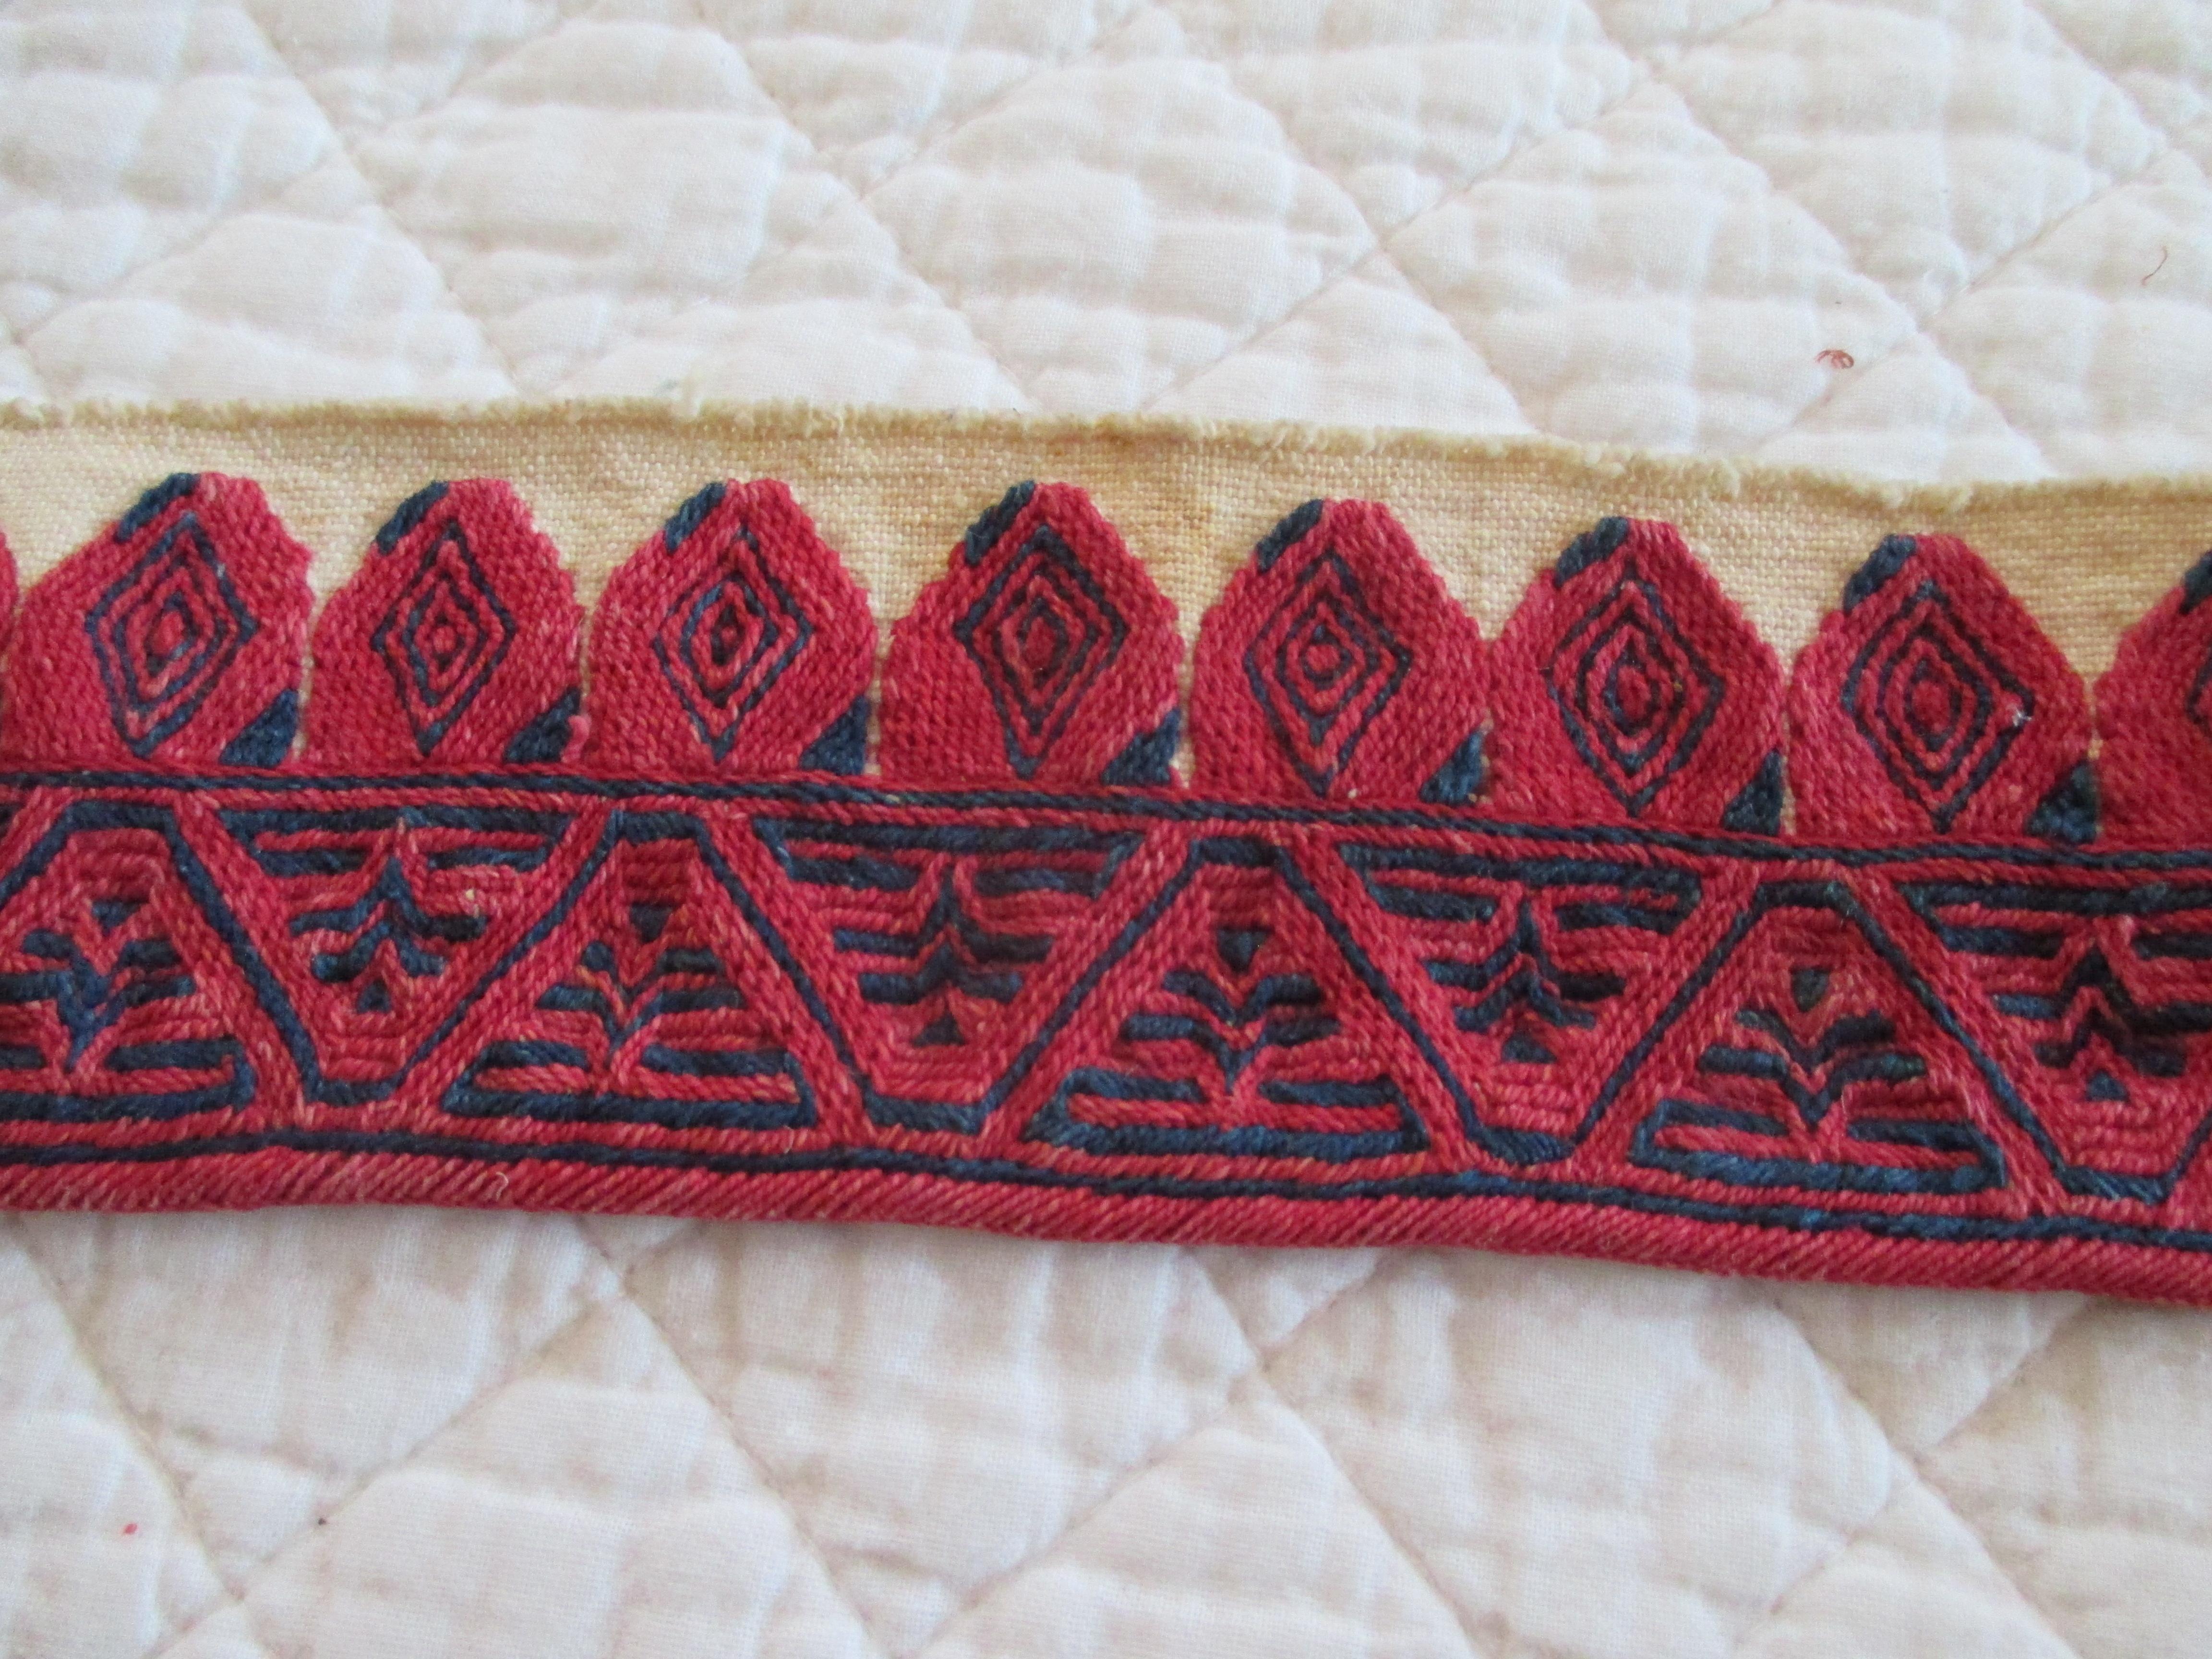 Hand-Crafted Antique Red and Blue Woven Decorative Linen Trim